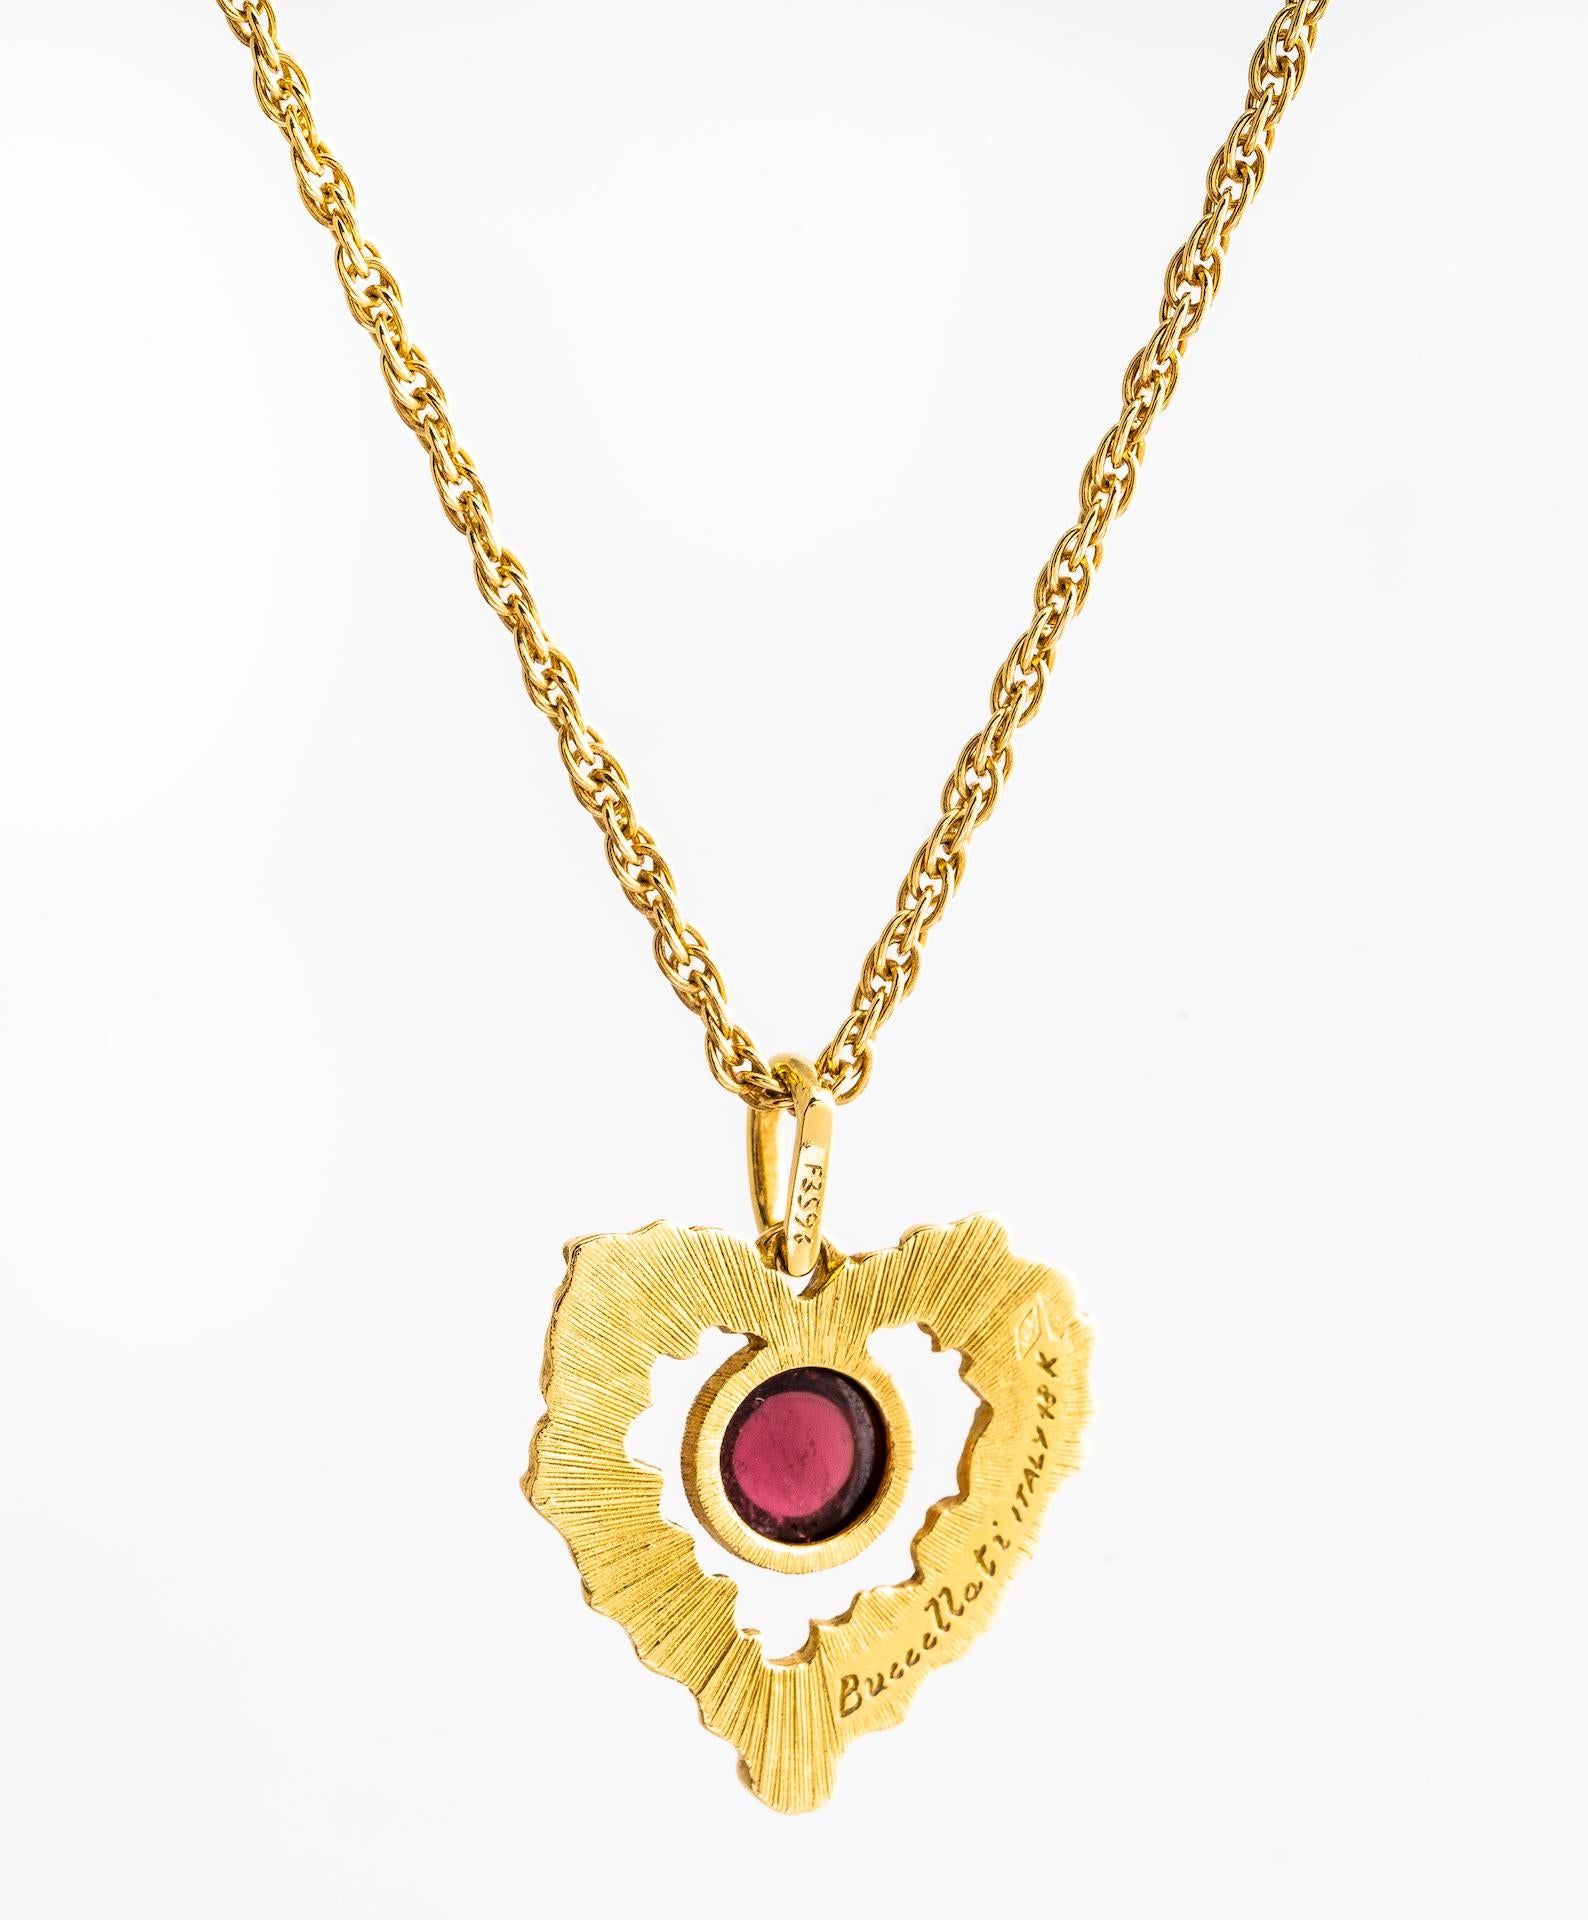 Vintage Buccellati 18K yellow gold textured heart pendant set with a rubelite on 18ky rope chain.  Cabochon measures 6mm and is bezel set in 18KY gold surrounded by gold heart leaf design.  Heart pendant measures 20mm.  Rope chain is 2mm in width